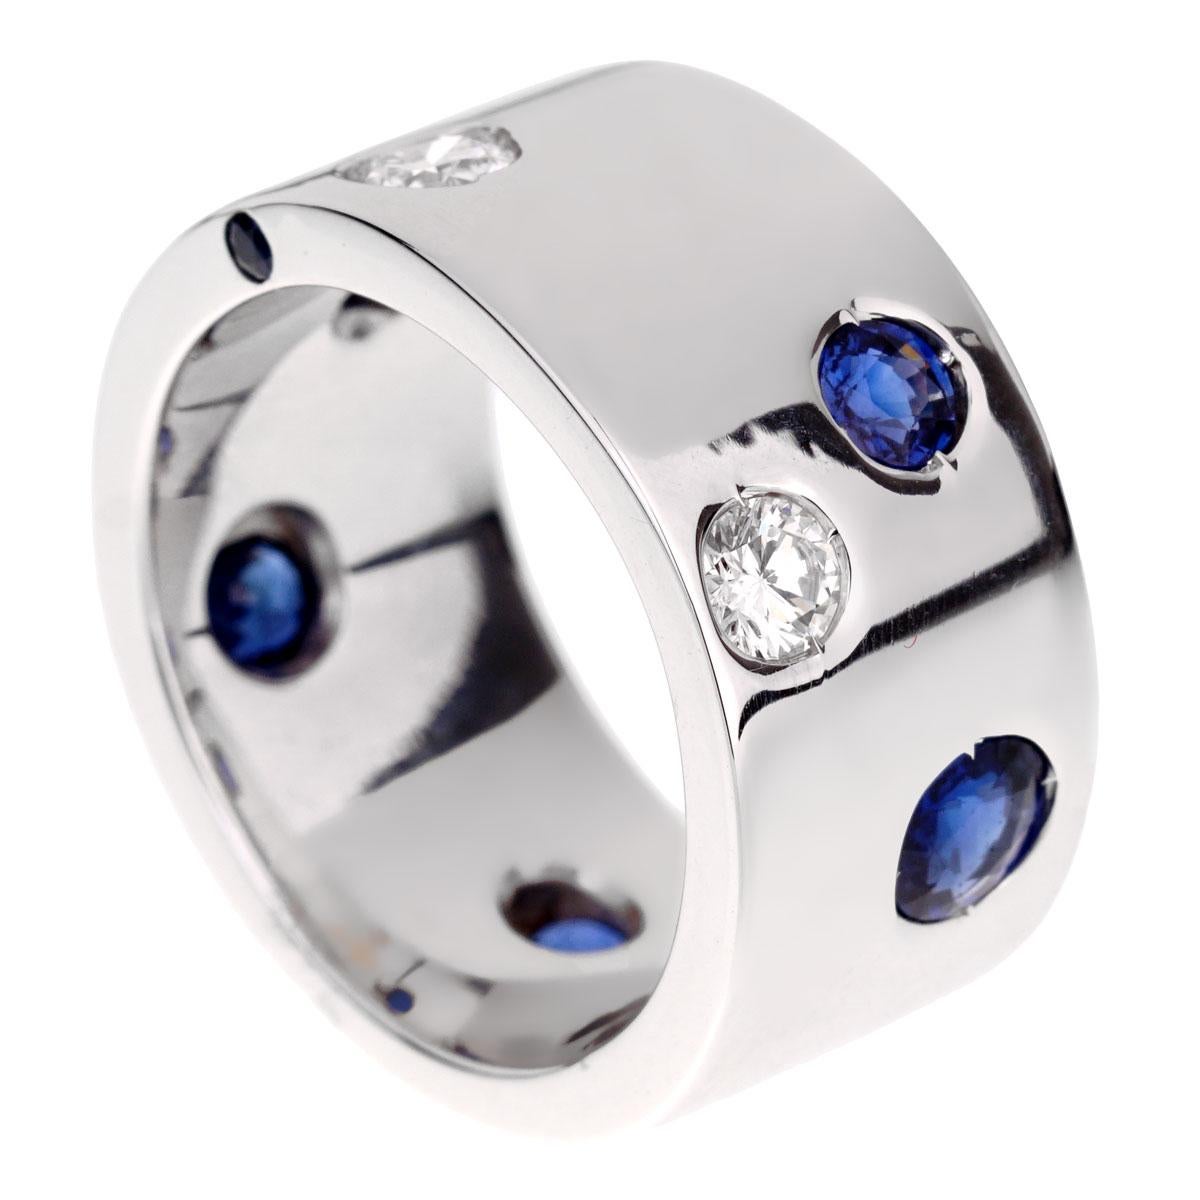 A fabulous Chanel band style ring showcasing 2 round brilliant cut diamonds and 6 sapphires set in 18k white gold. The ring measures a size 6 1/4

Width: .39